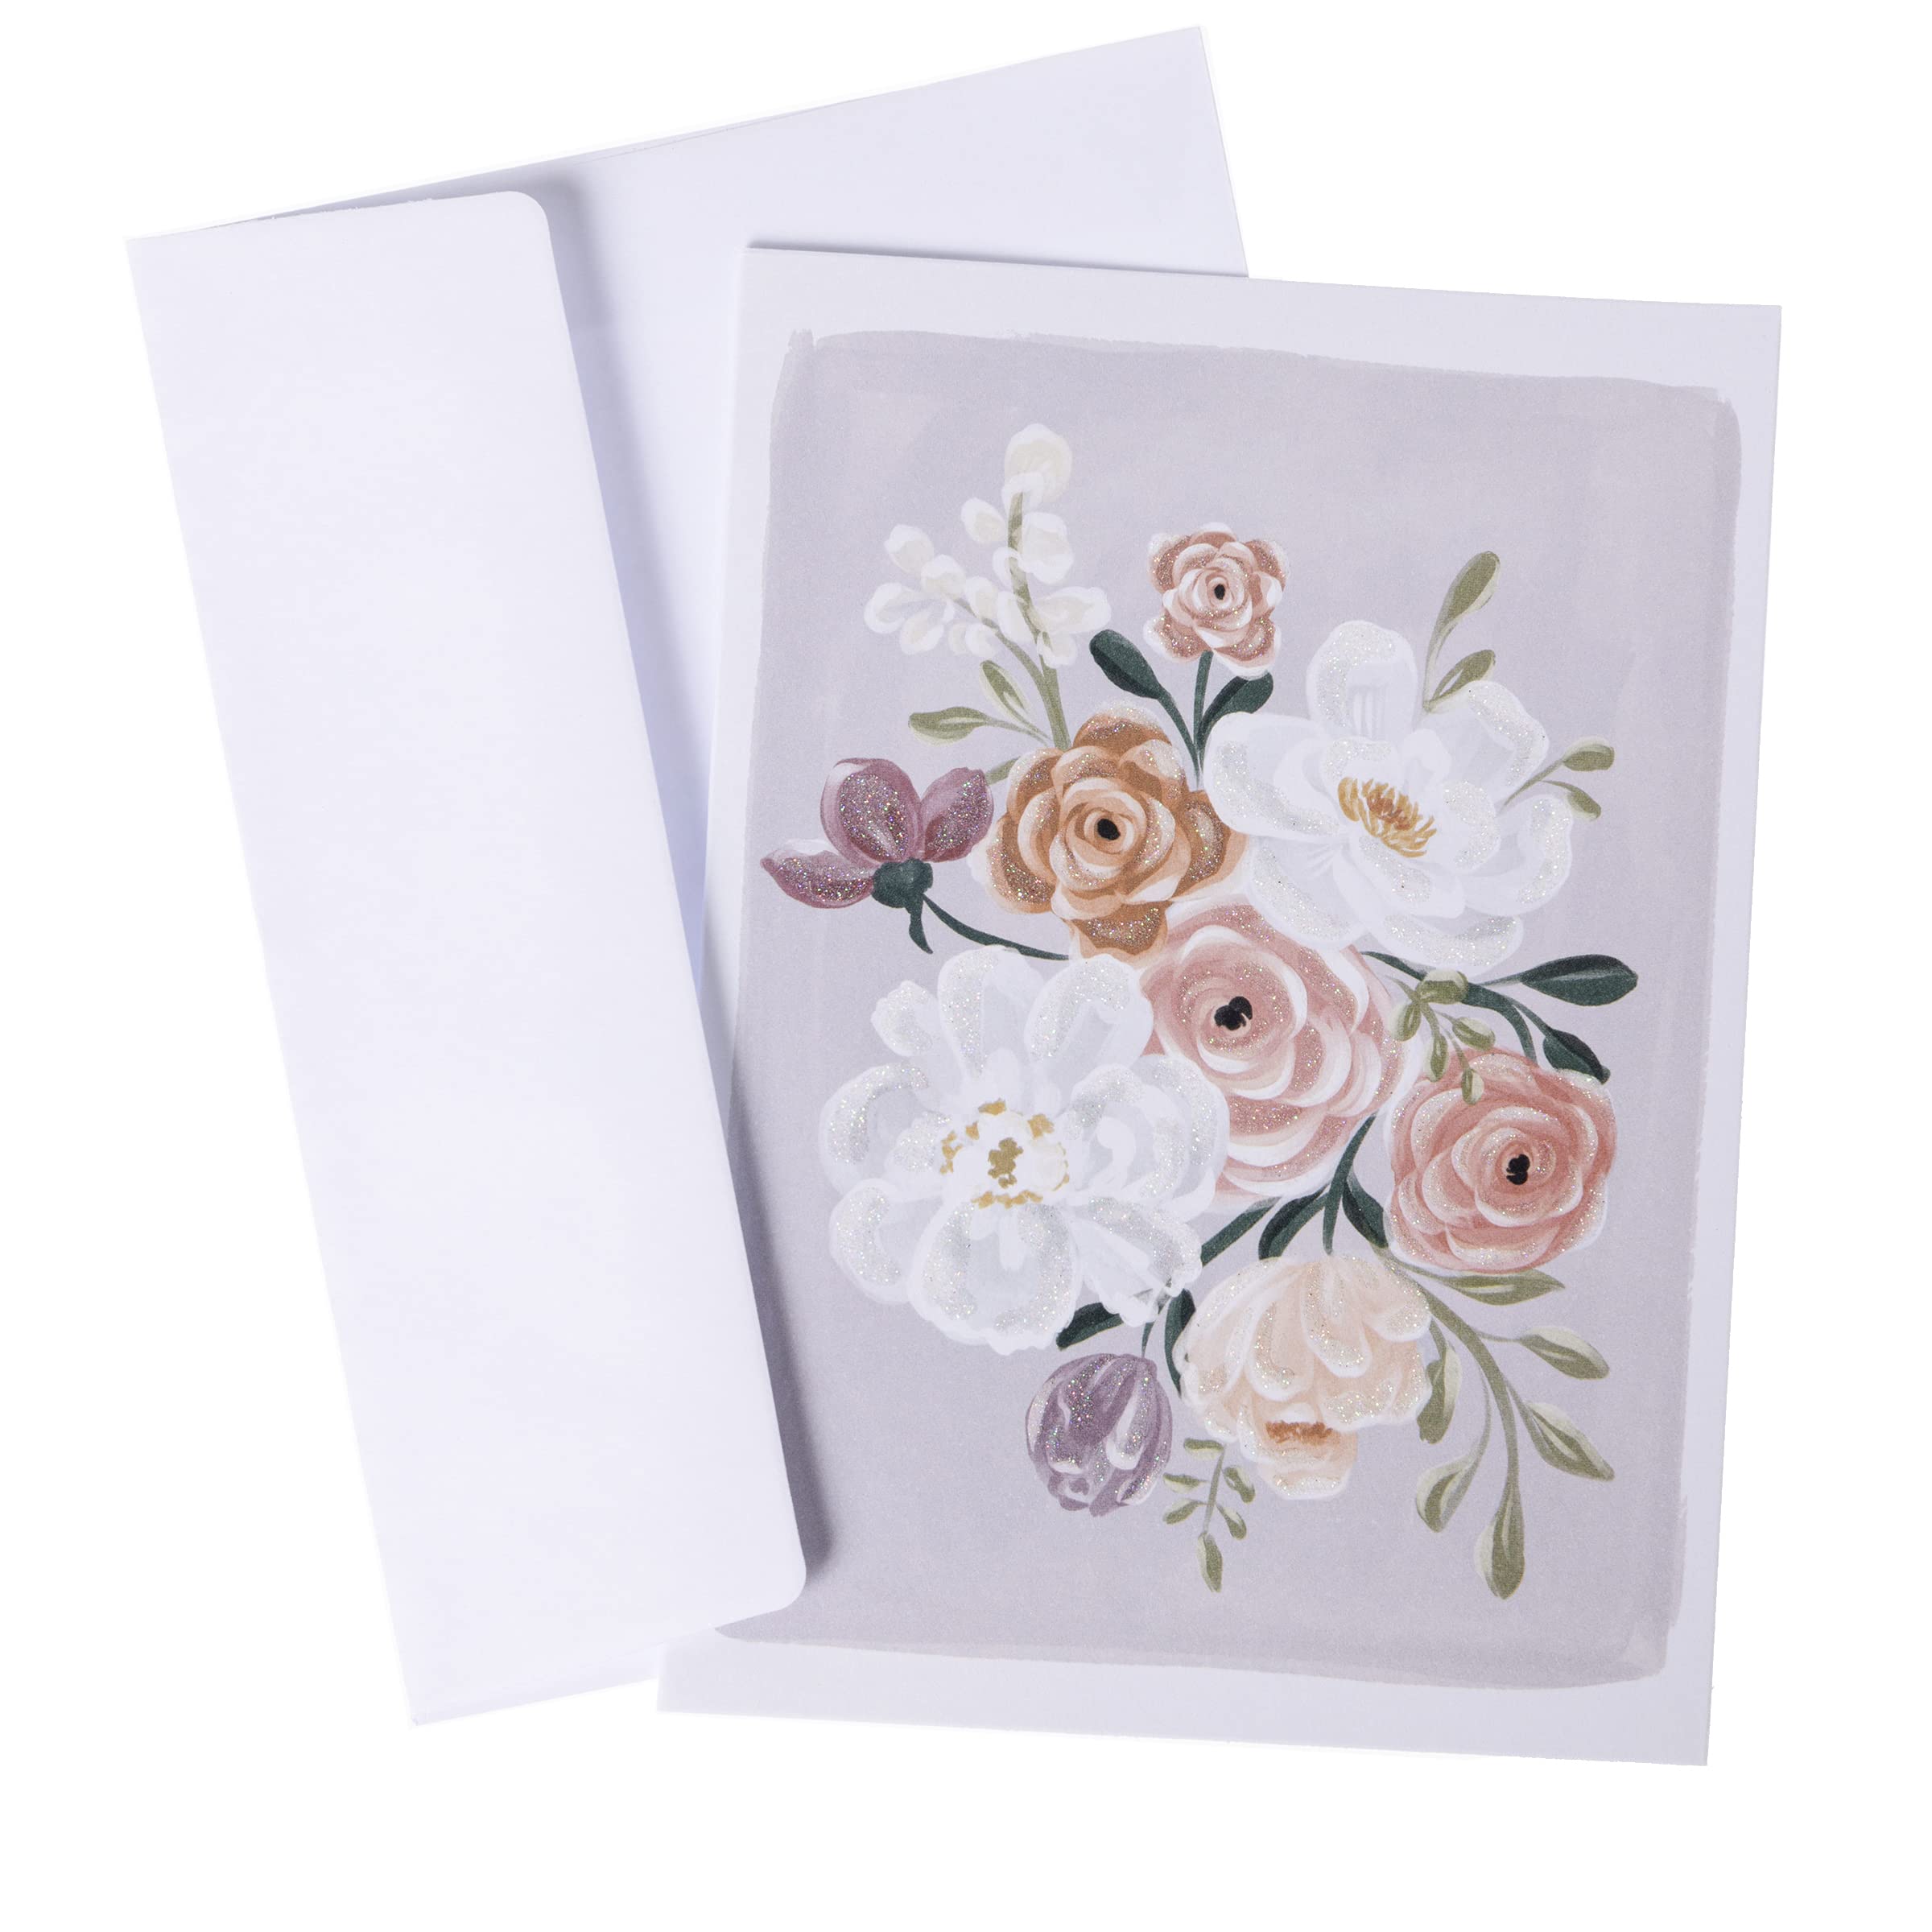 Graphique Floral Assorted Cards | Pack of 20 Blank Cards with Envelopes | All Occasion Greetings | 4 Assorted Designs with Glitter Accents | Boxed Set for Personalized Notes | 4.25